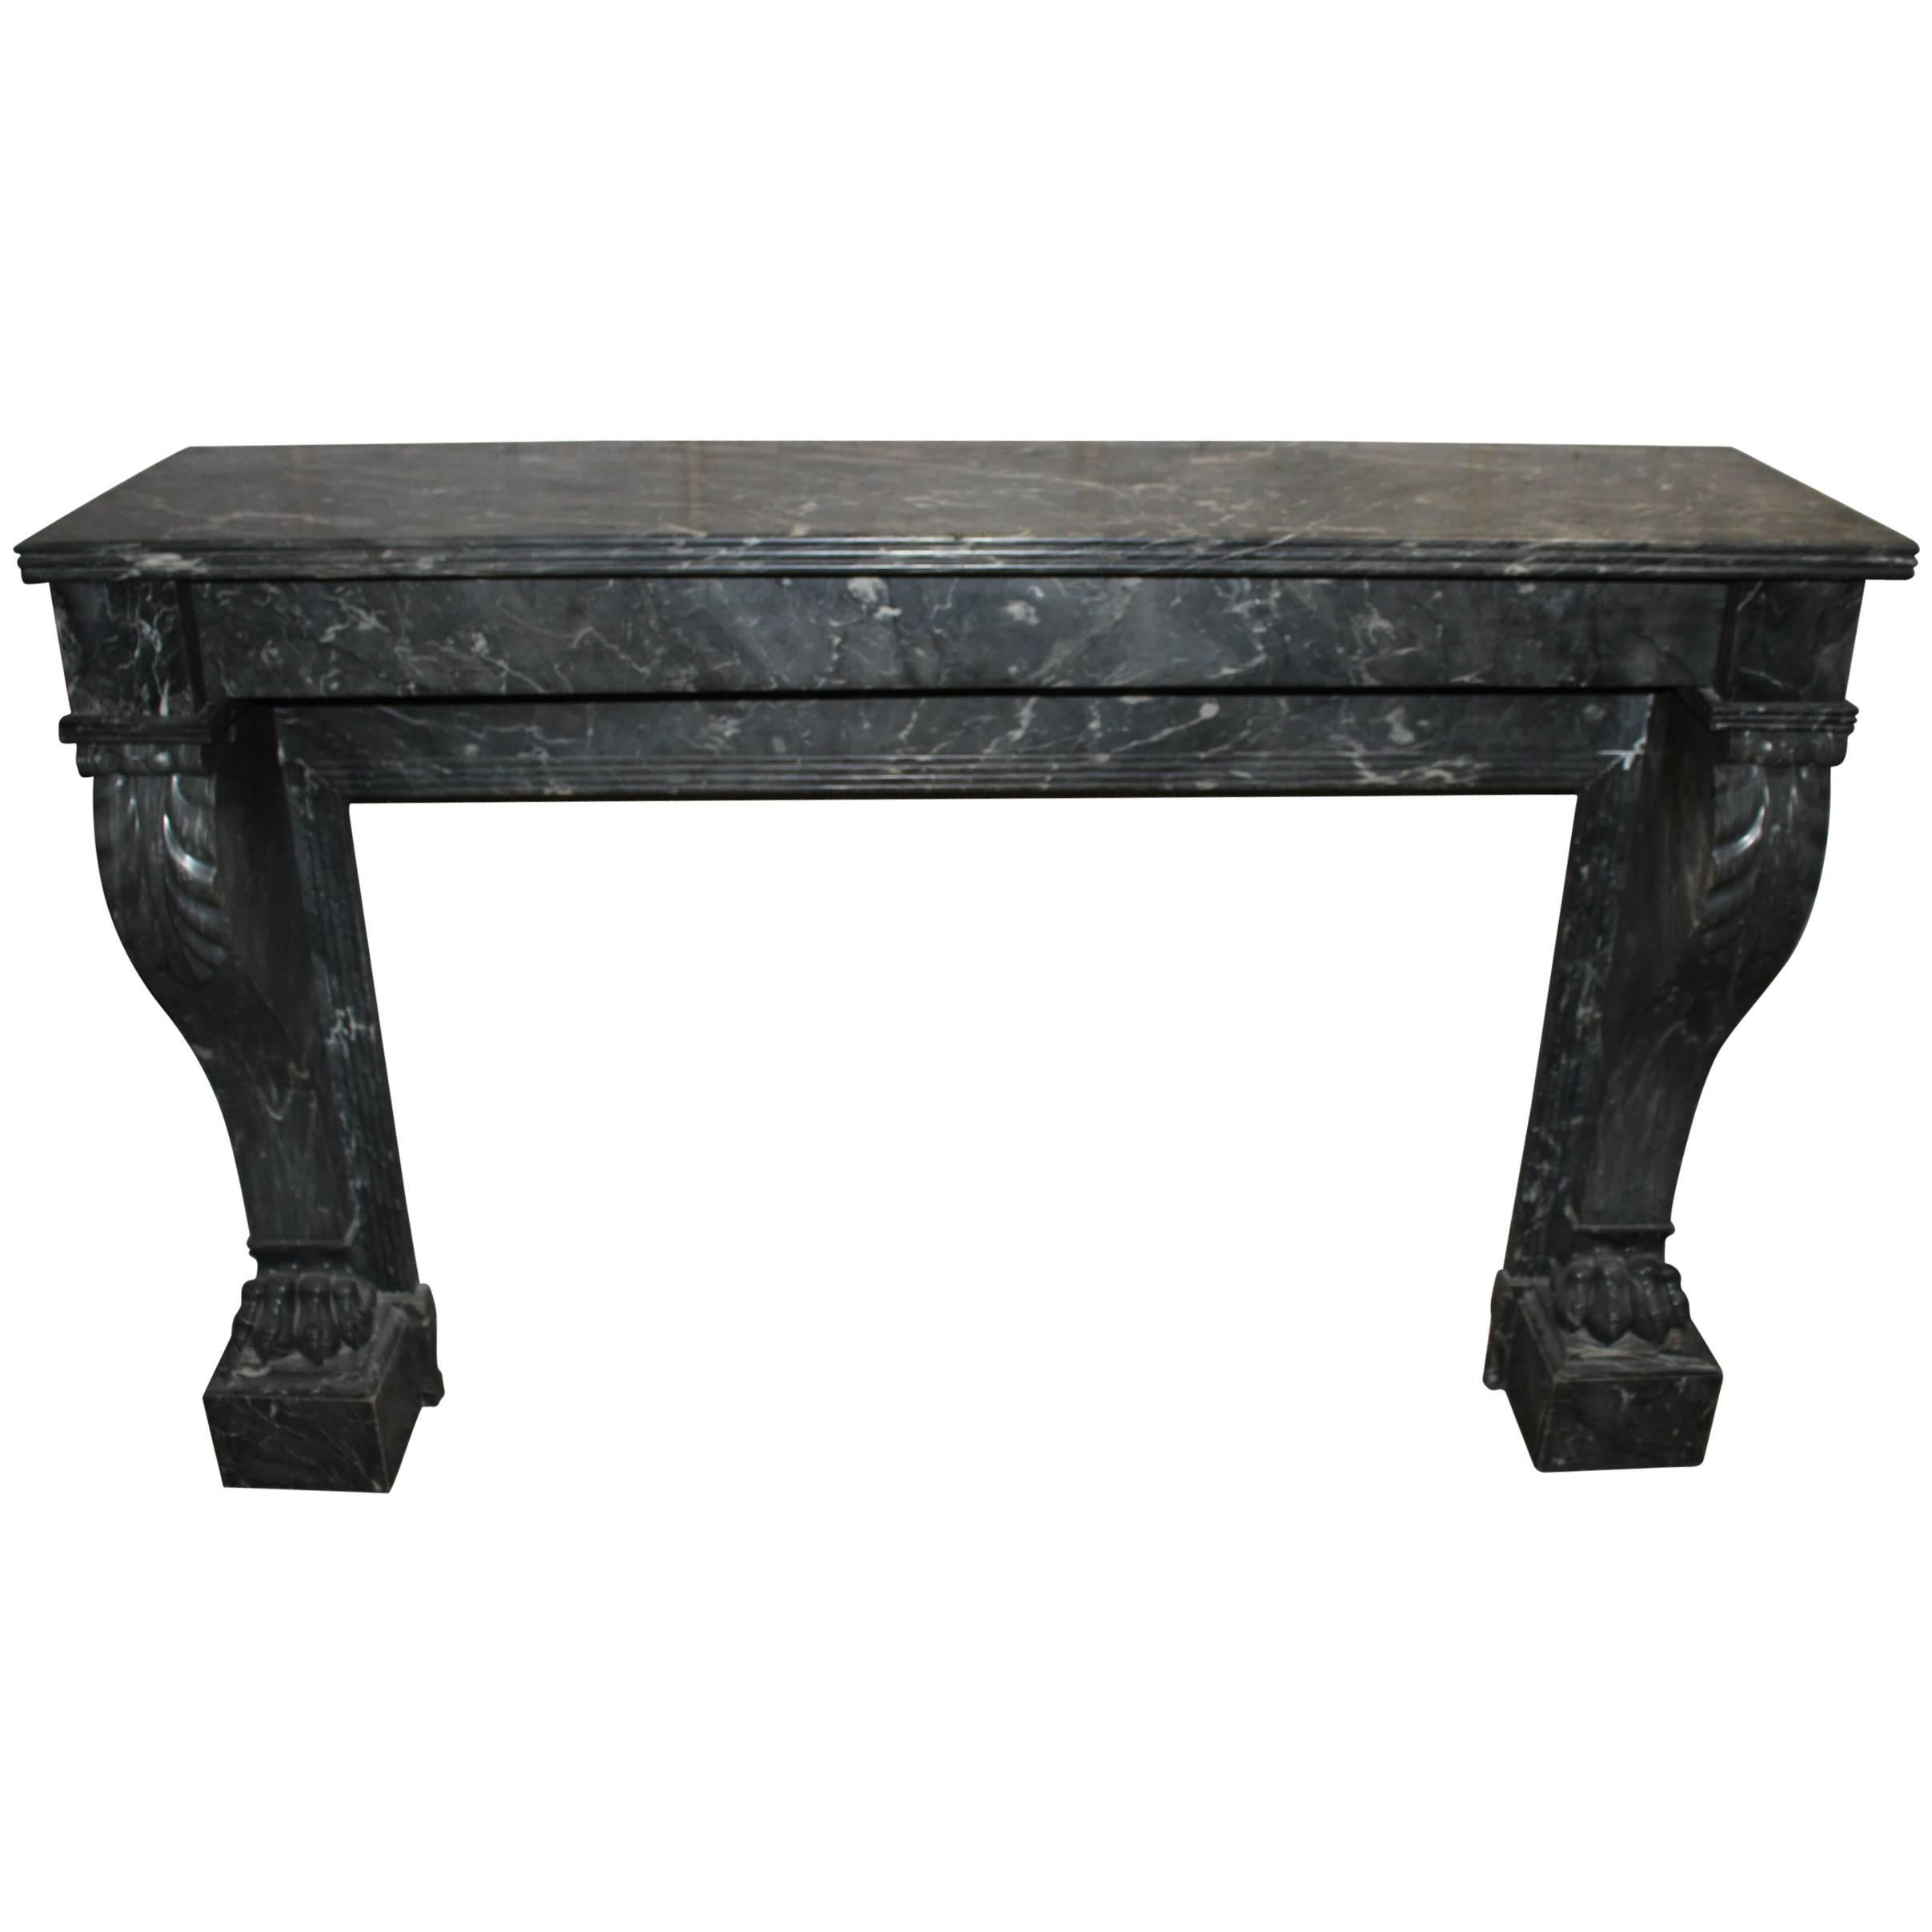 French Empire Marble Mantel